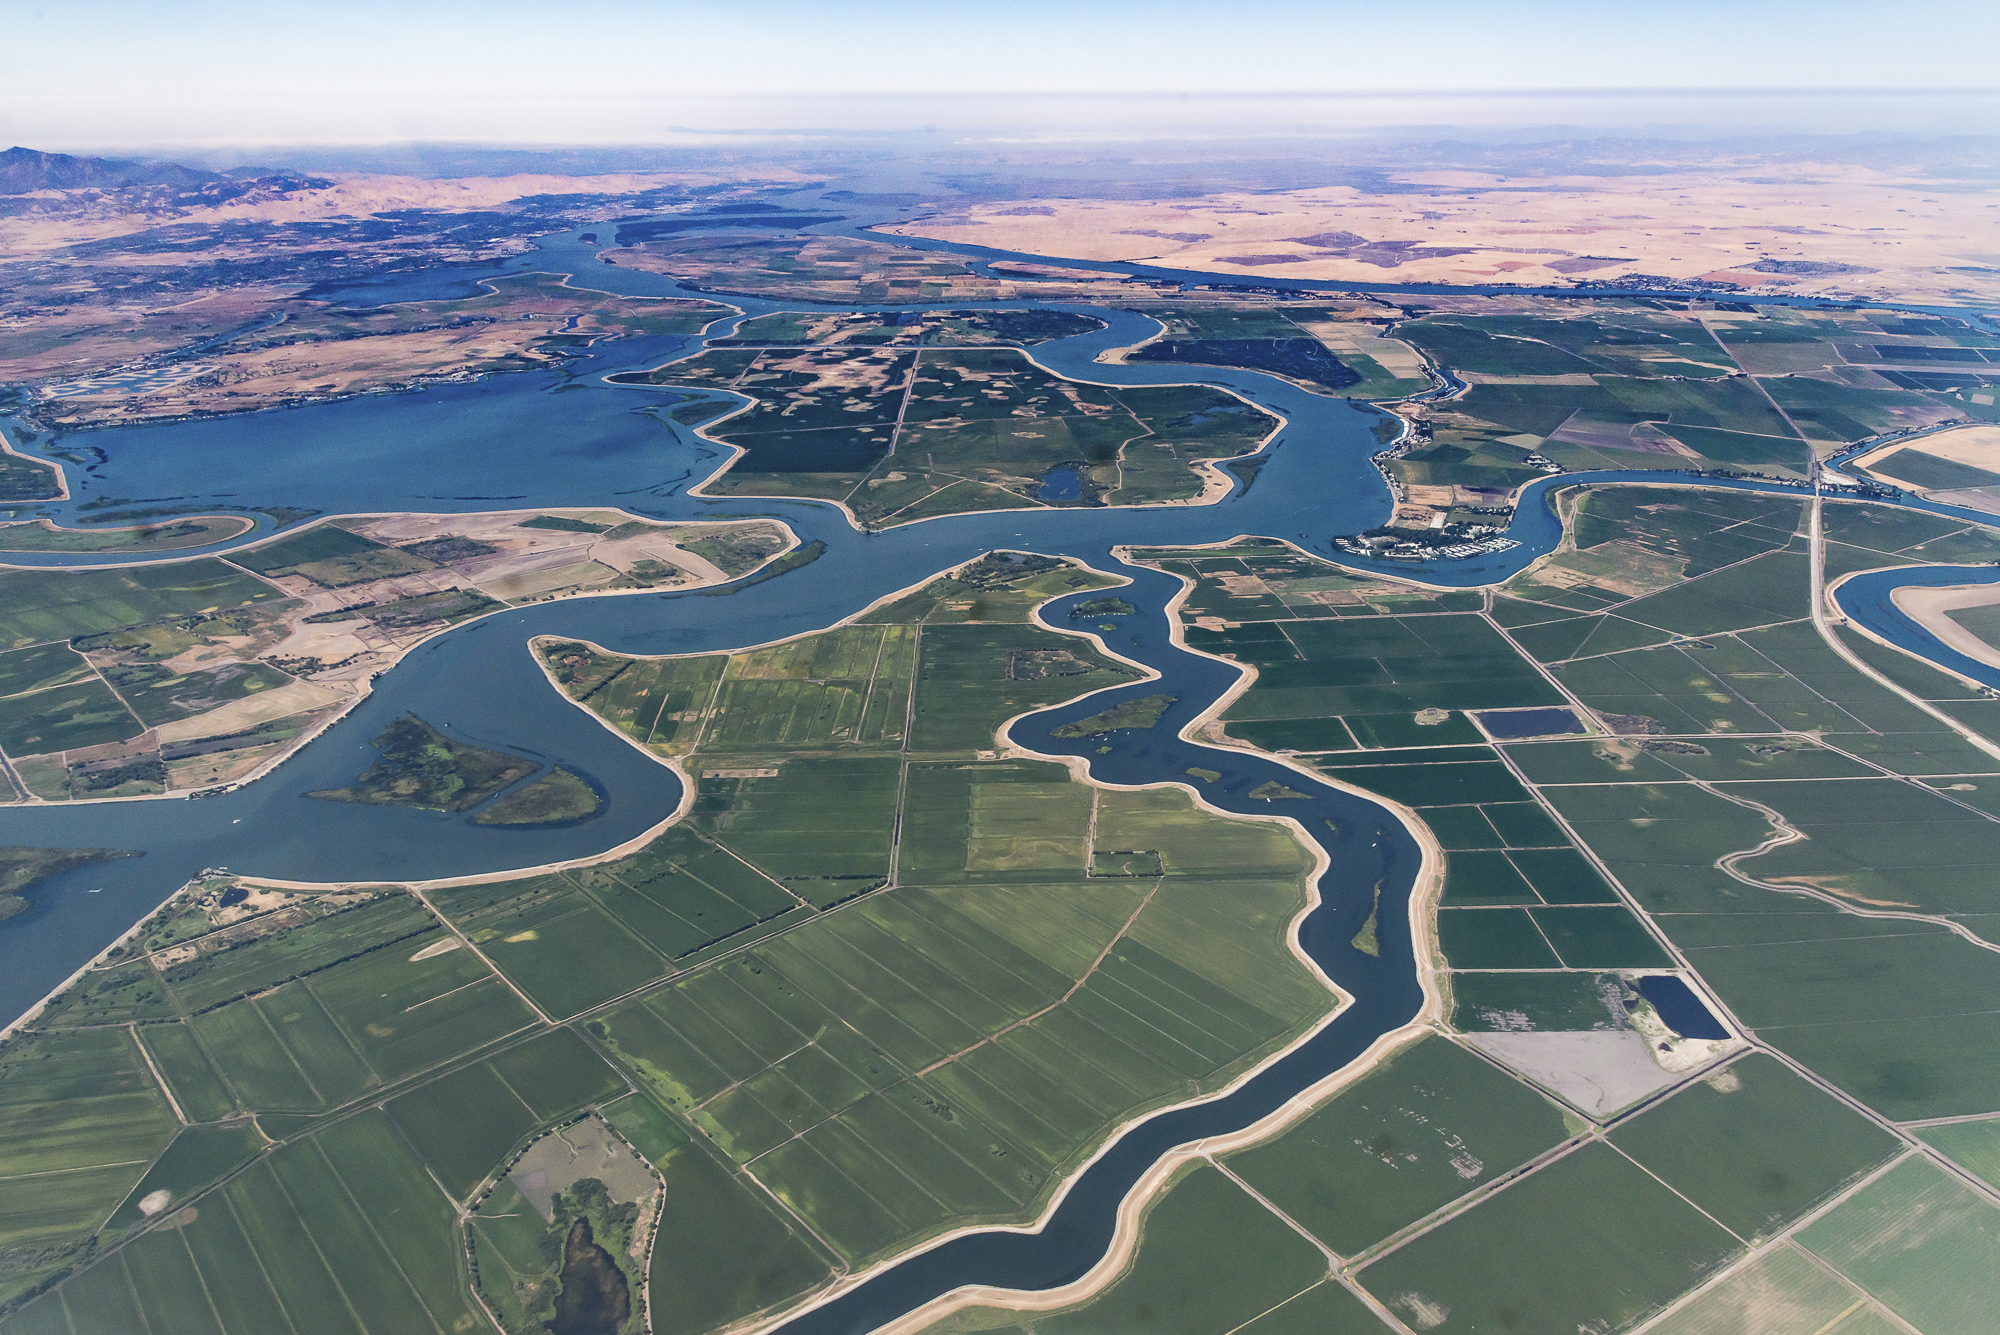 California's water conundrum hinges on Delta